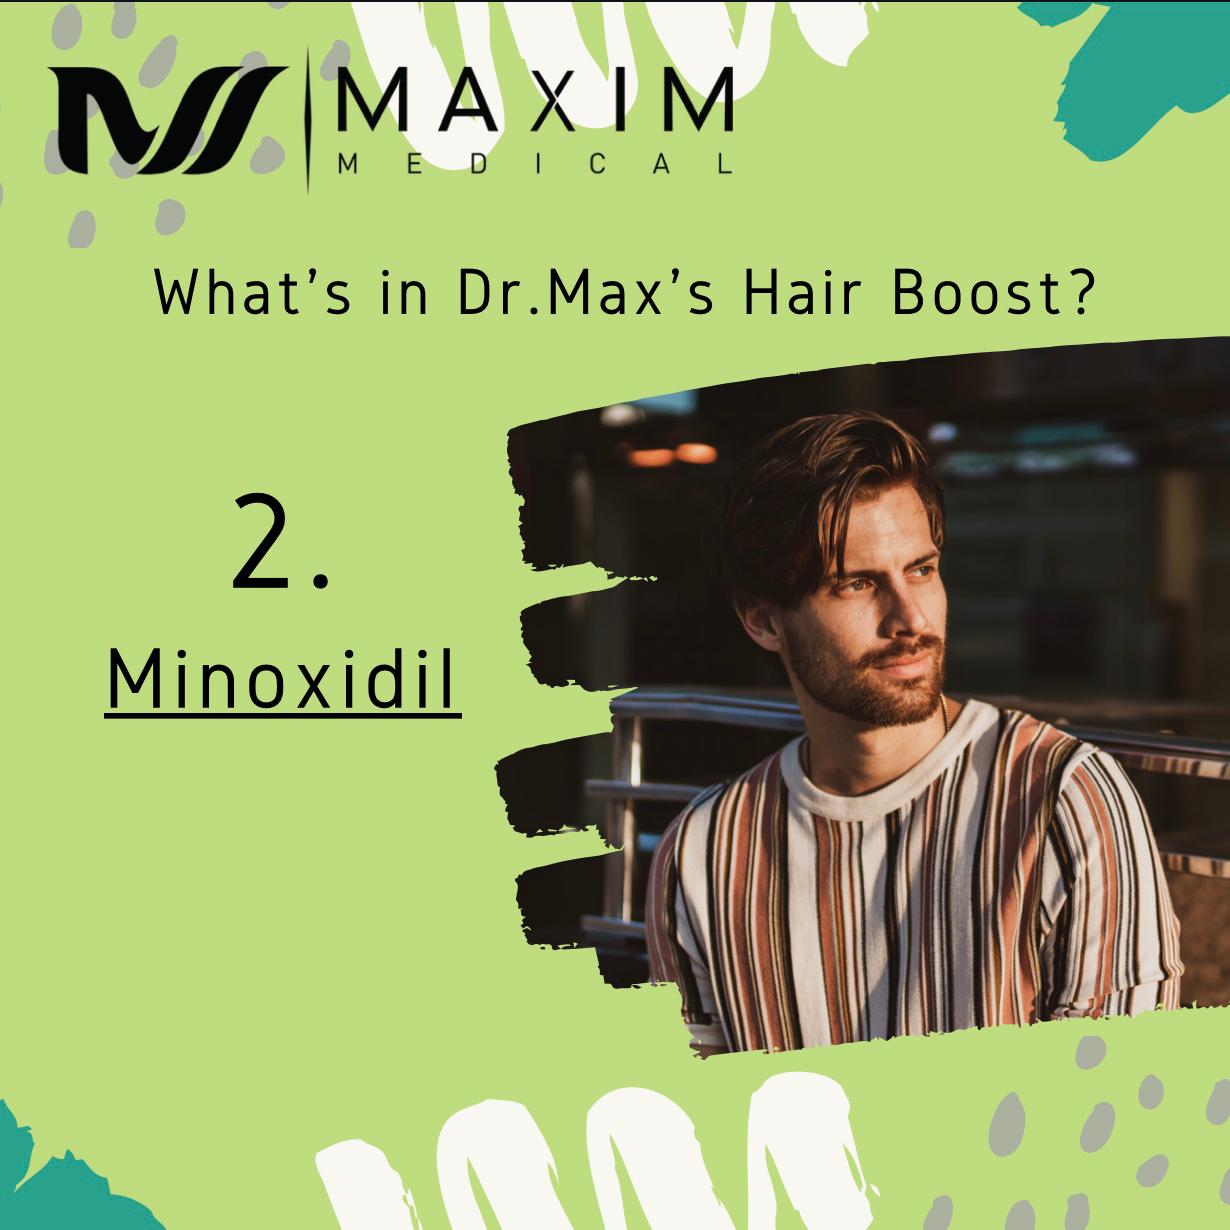 2. Minoxidil

Originally created to treat high blood pressure, soon after that it was discovered that Minoxidil had properties that promote hair growth in patients. It is effective in helping promote hair growth in people with androgenic alopecia regardless of sex. About 40% of men experience hair regrowth after 3–6 months. Minoxidil must be used indefinitely for continued support of existing hair follicles and the maintenance of any experienced hair regrowth. The mechanism by which minoxidil promotes hair growth is not fully understood. Minoxidil is a potassium channel opener, causing hyperpolarization of cell membranes. Theoretically, by widening blood vessels and opening potassium channels, it allows more oxygen, blood, and nutrients to the follicles. This may cause follicles in the telogen phase to shed, which are then replaced by thicker hairs in a new anagen phase.